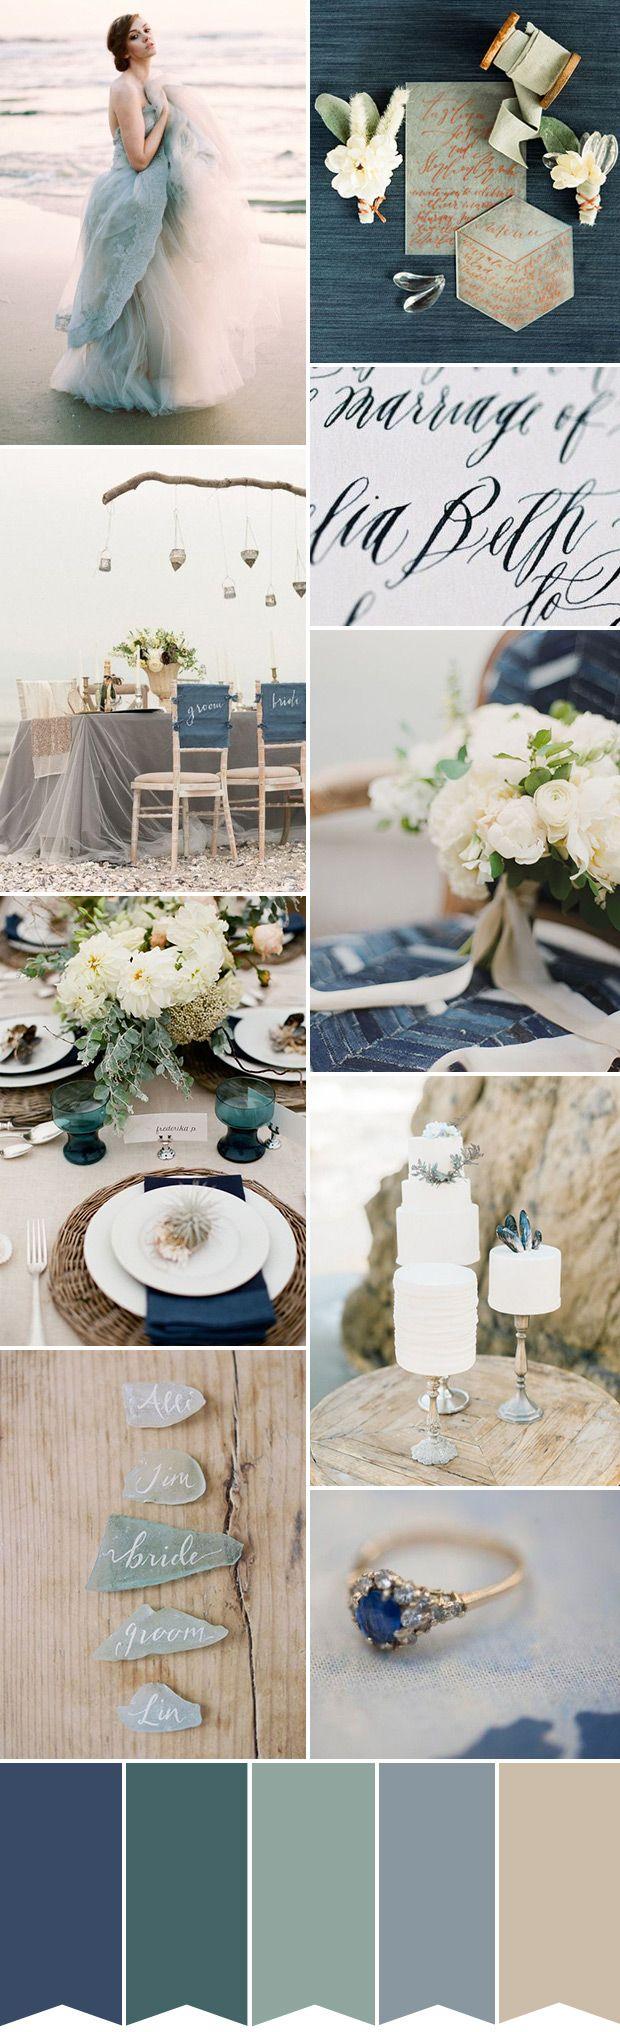 Wedding - Inspired By The Sea Wedding Colour Inspiration